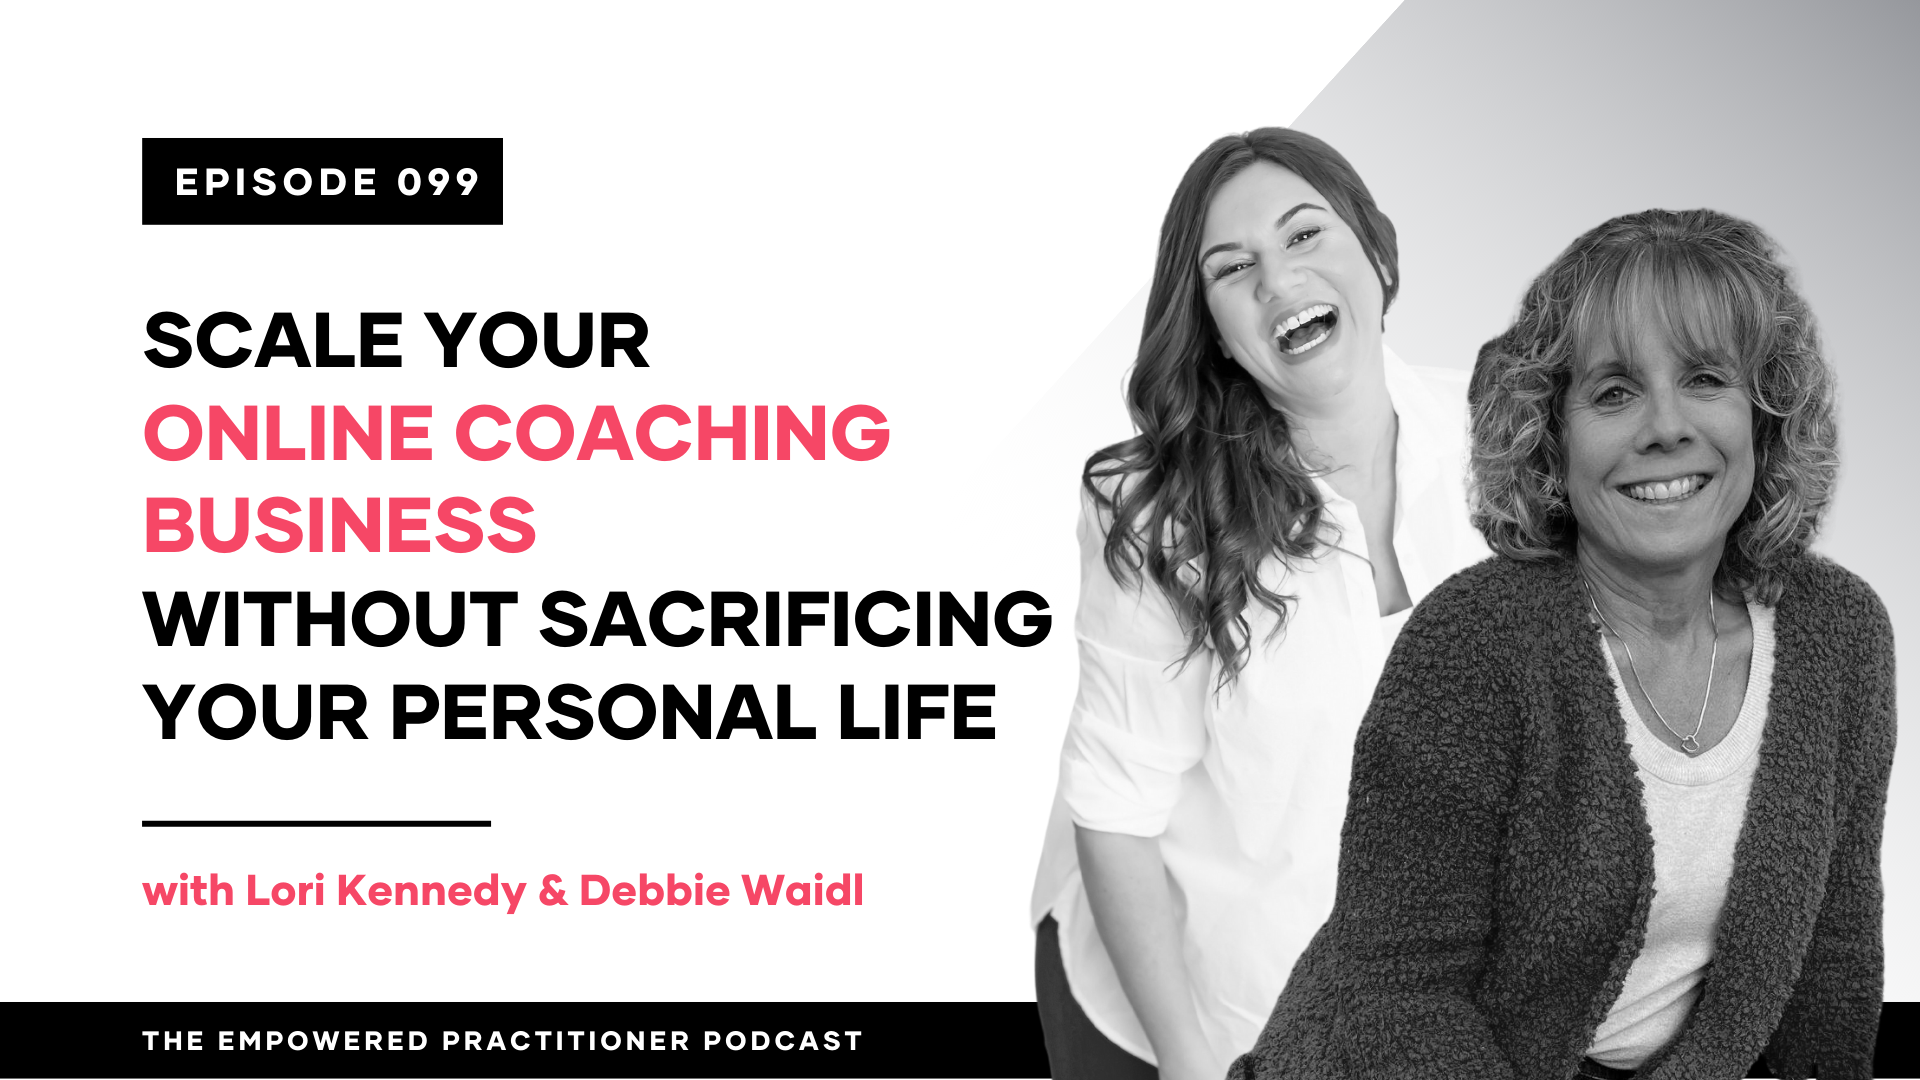 Scale your Online Coaching Business Without Sacrificing Your Personal Life